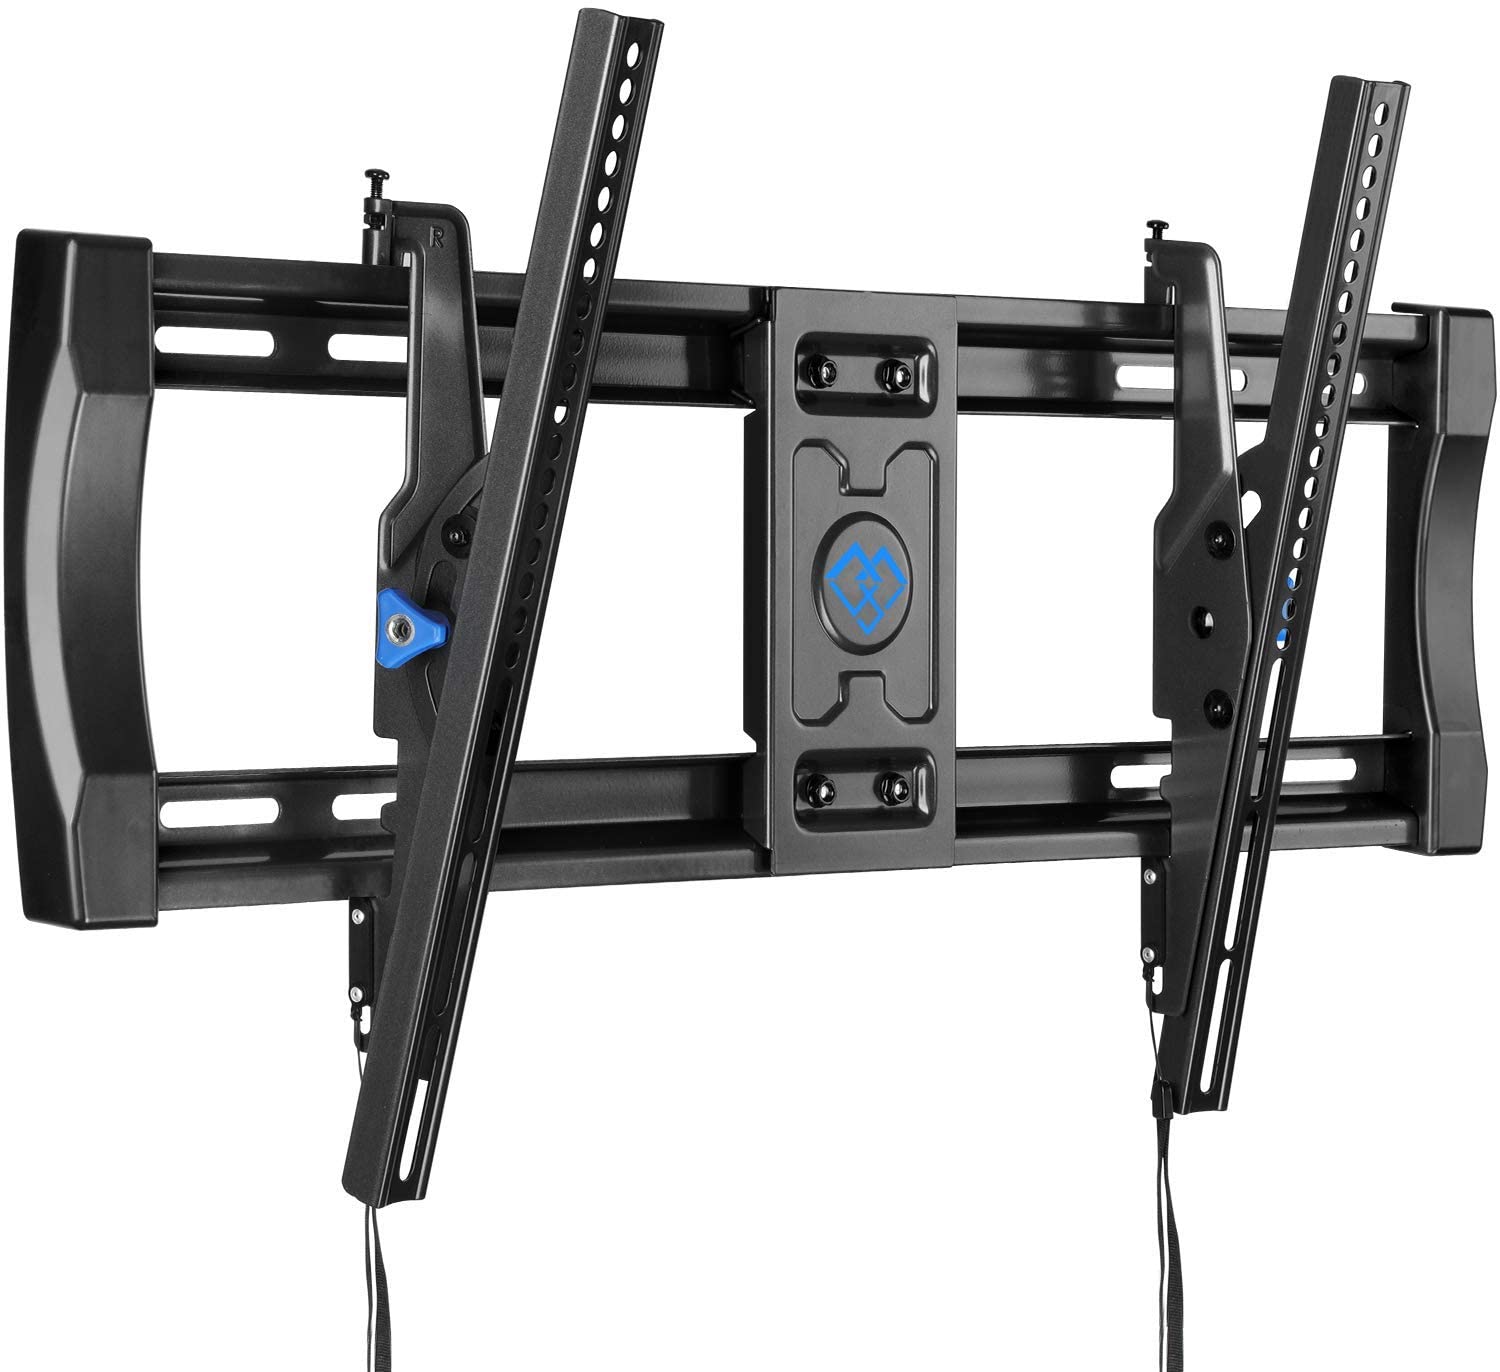 NEW Model : PERLESMITH Tilting TV Wall Mount for 40-82 Inch LED & Curved Flat Screen TVs - 12 ° Tilt Mounting with VESA 600x400mm Holds up to 135 - Can be LEVELED - YMMV $15.99